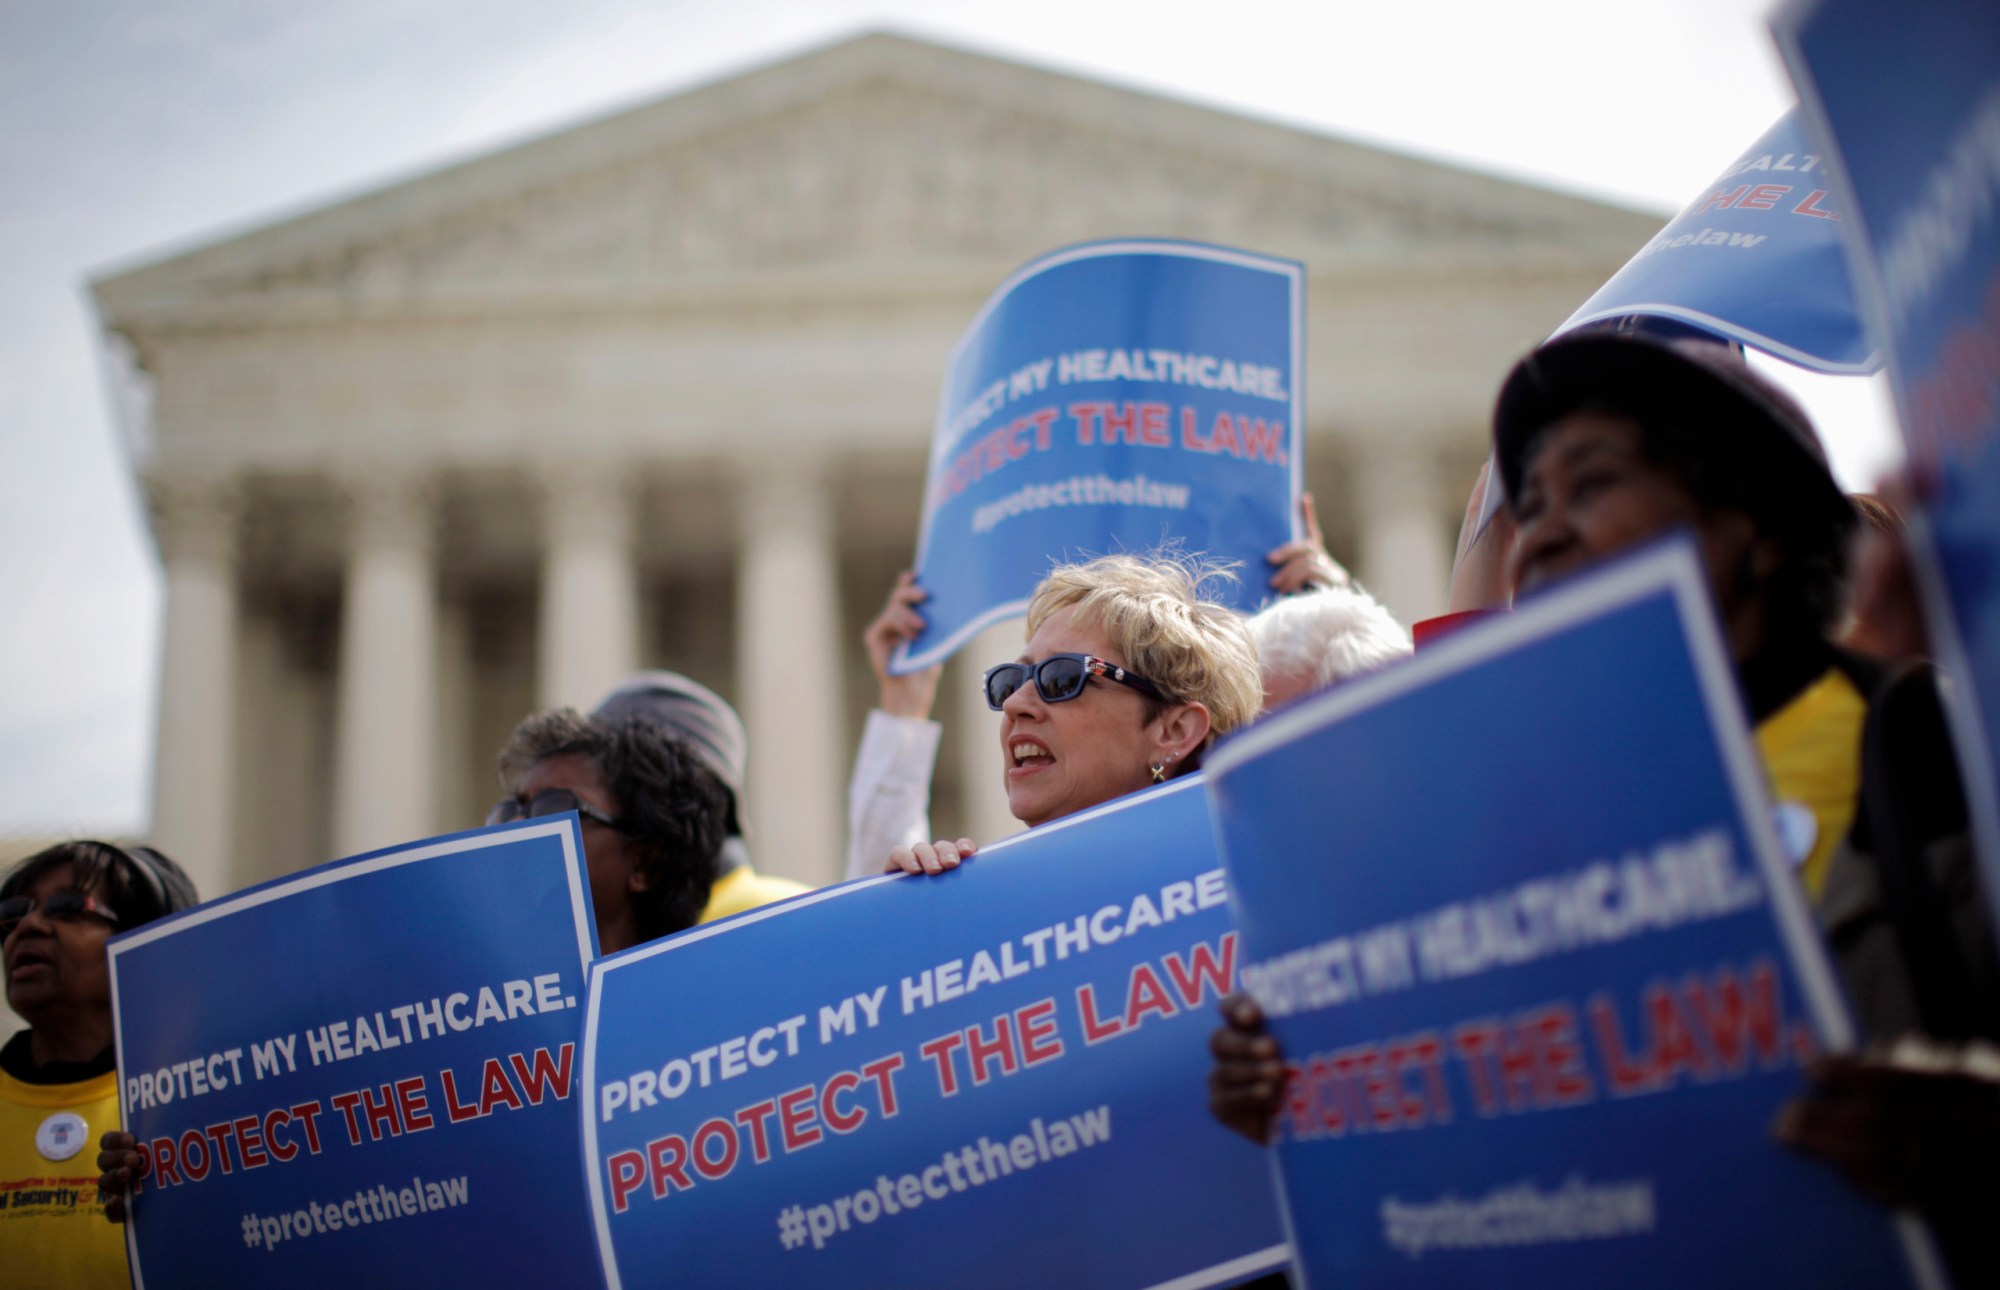 Supporters of health care reform rally in front of the Supreme Court in Washington on the final day of arguments regarding the health care law signed by President Barack Obama. (AP/ Charles Dharapak)